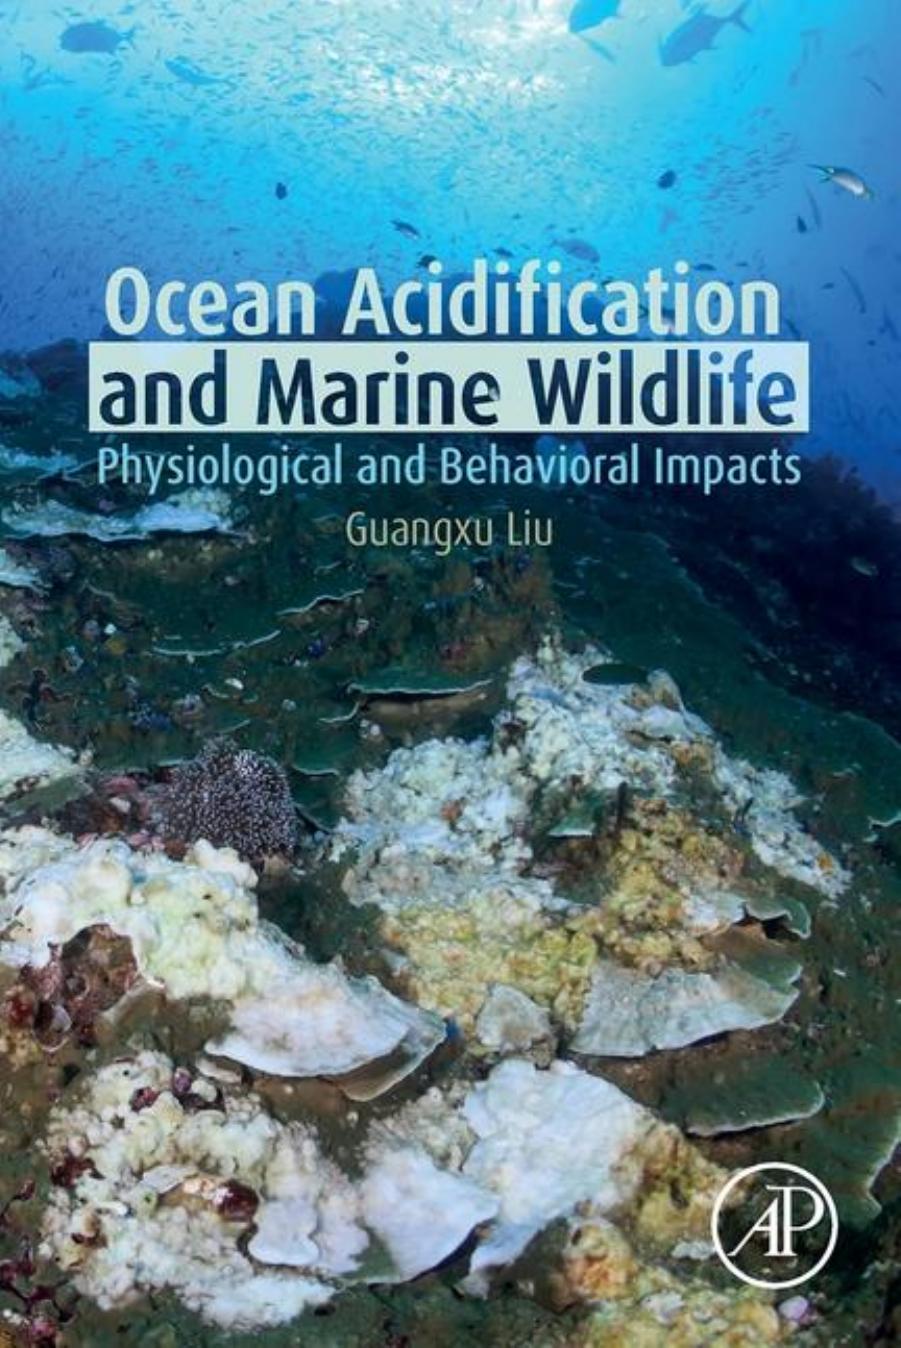 Ocean Acidification and Marine Wildlife: Physiological and Behavioral Impacts by Guangxu Liu